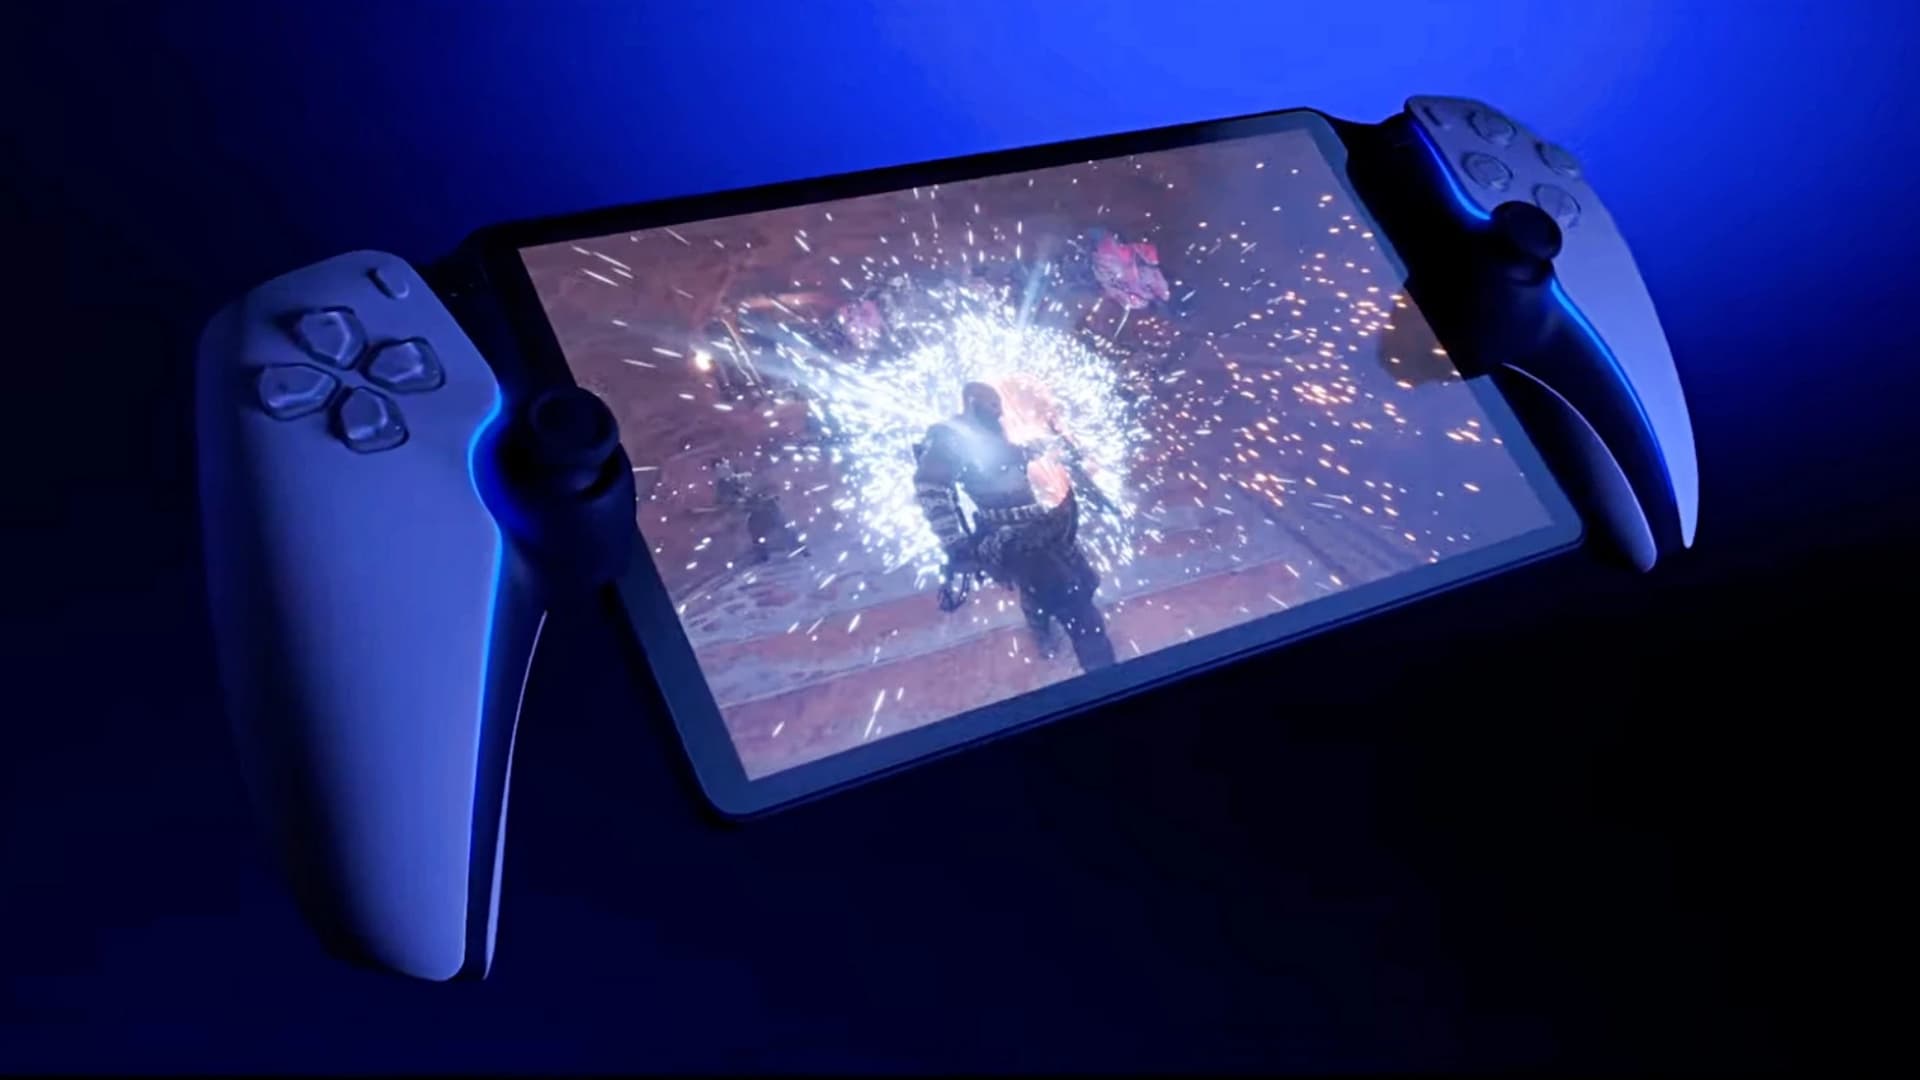 PlayStation Portal: Sony Officially Dubs Project Q Device